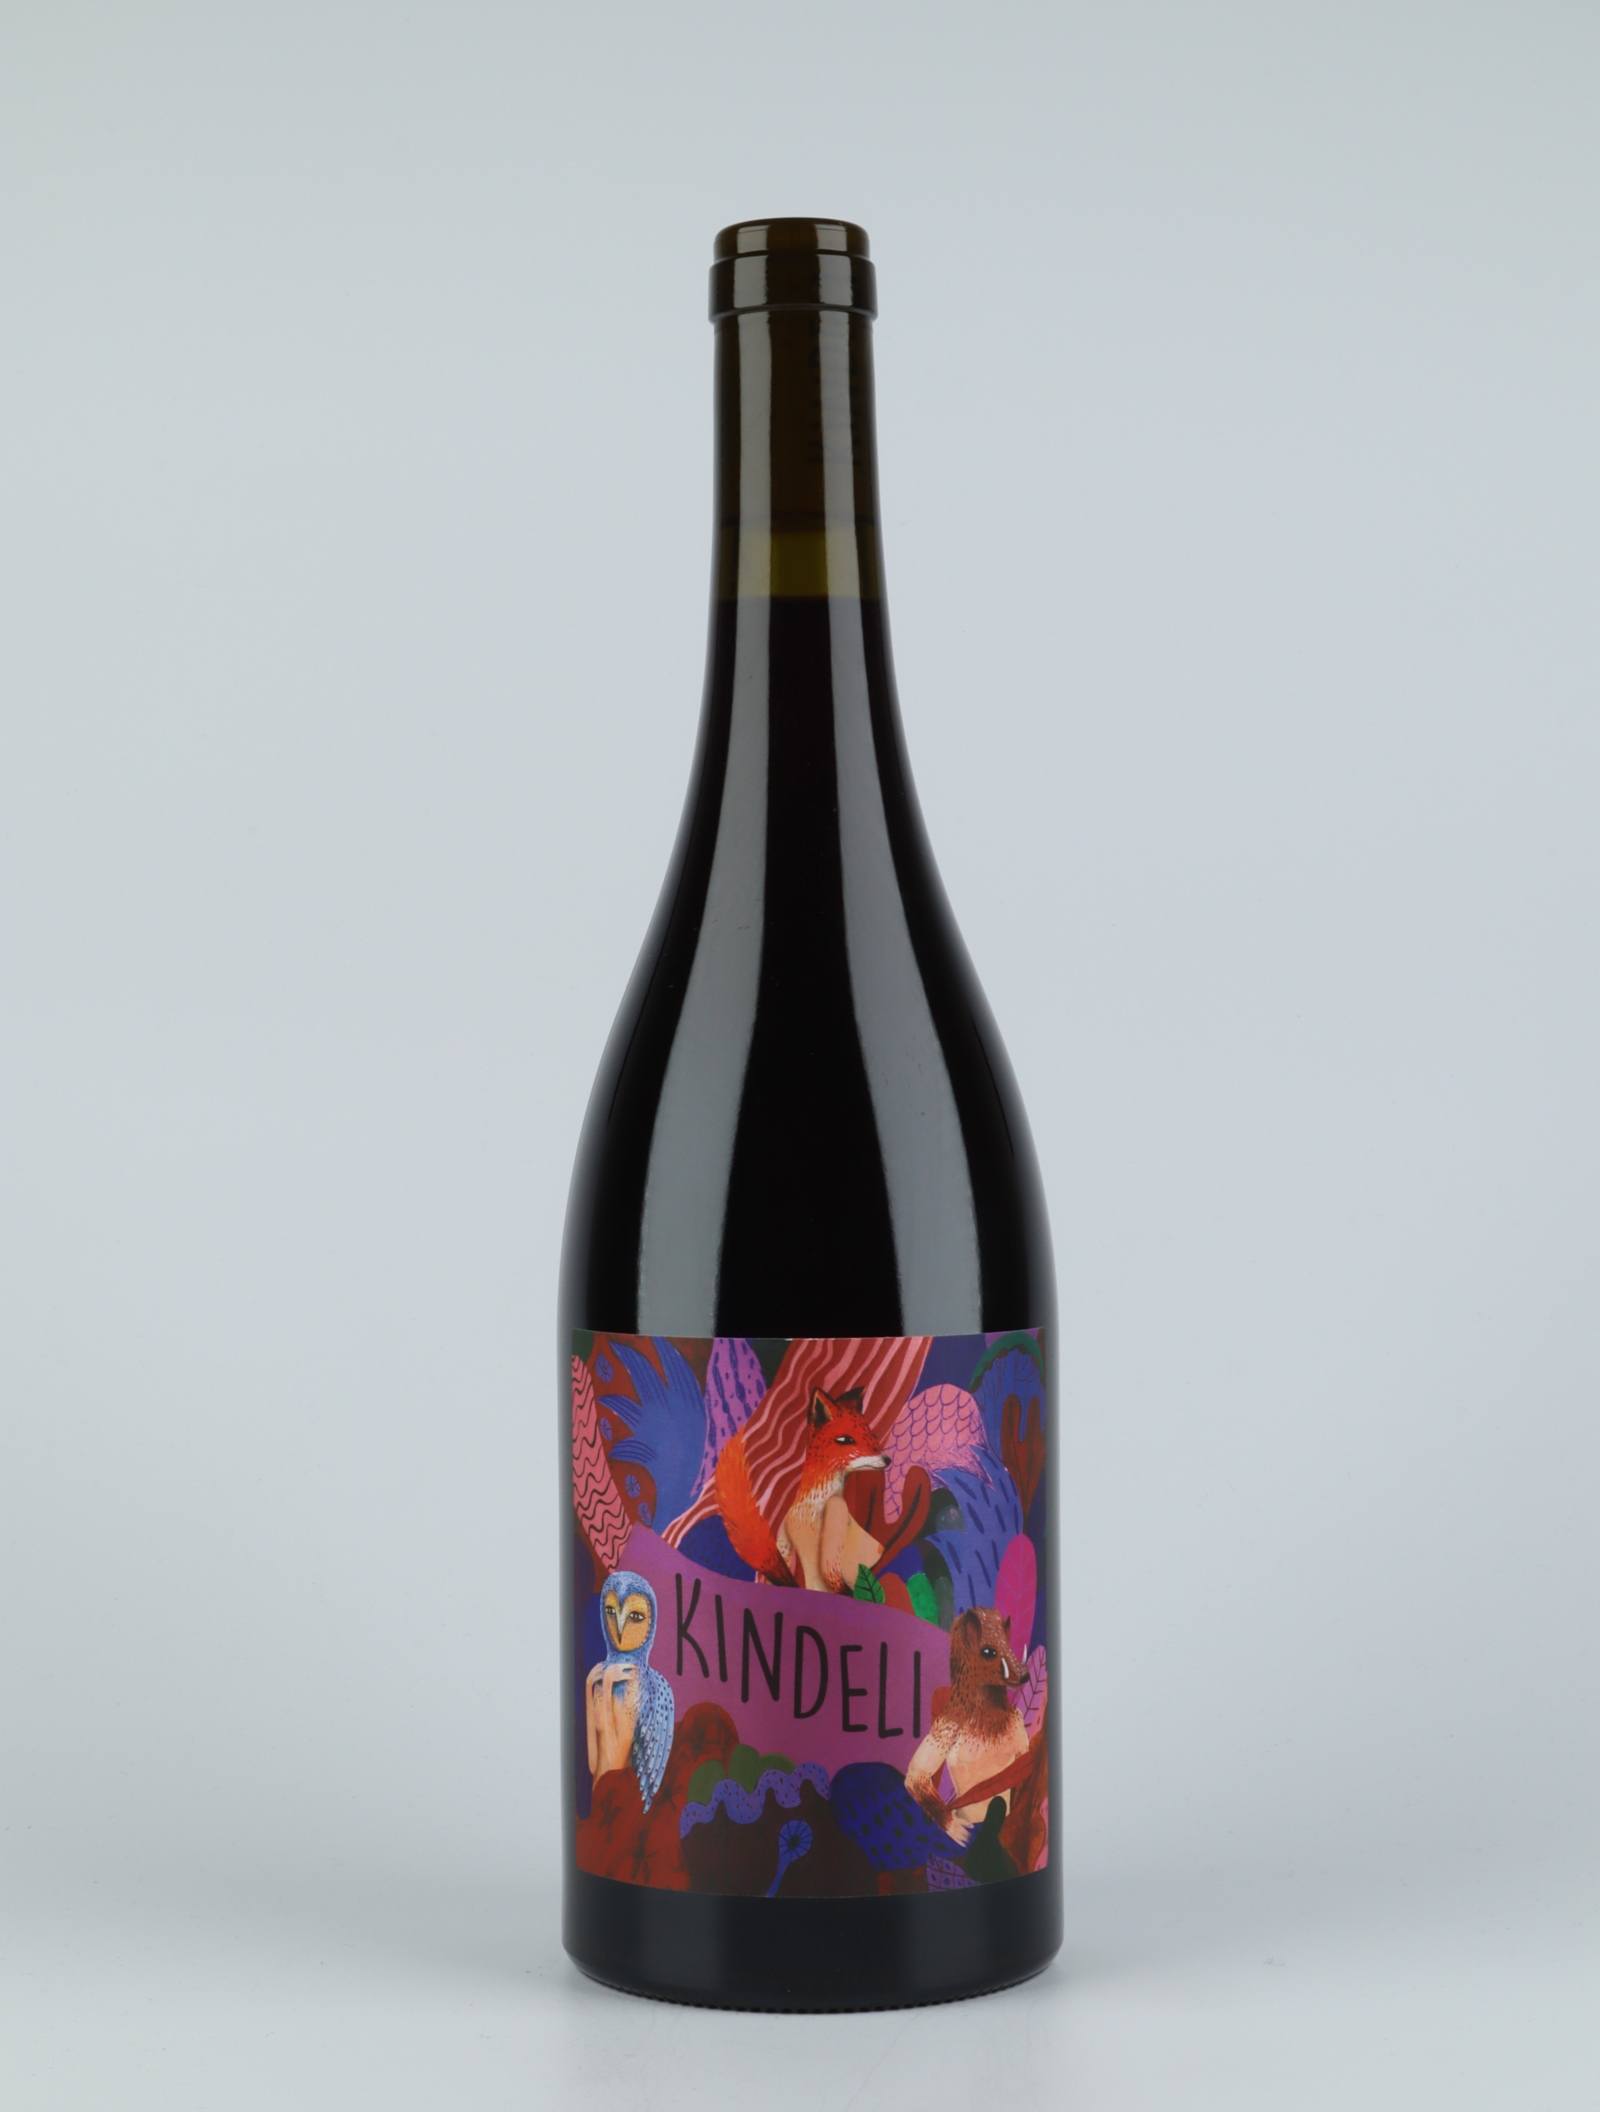 A bottle 2019 Tinto Red wine from Kindeli, Nelson in New Zealand